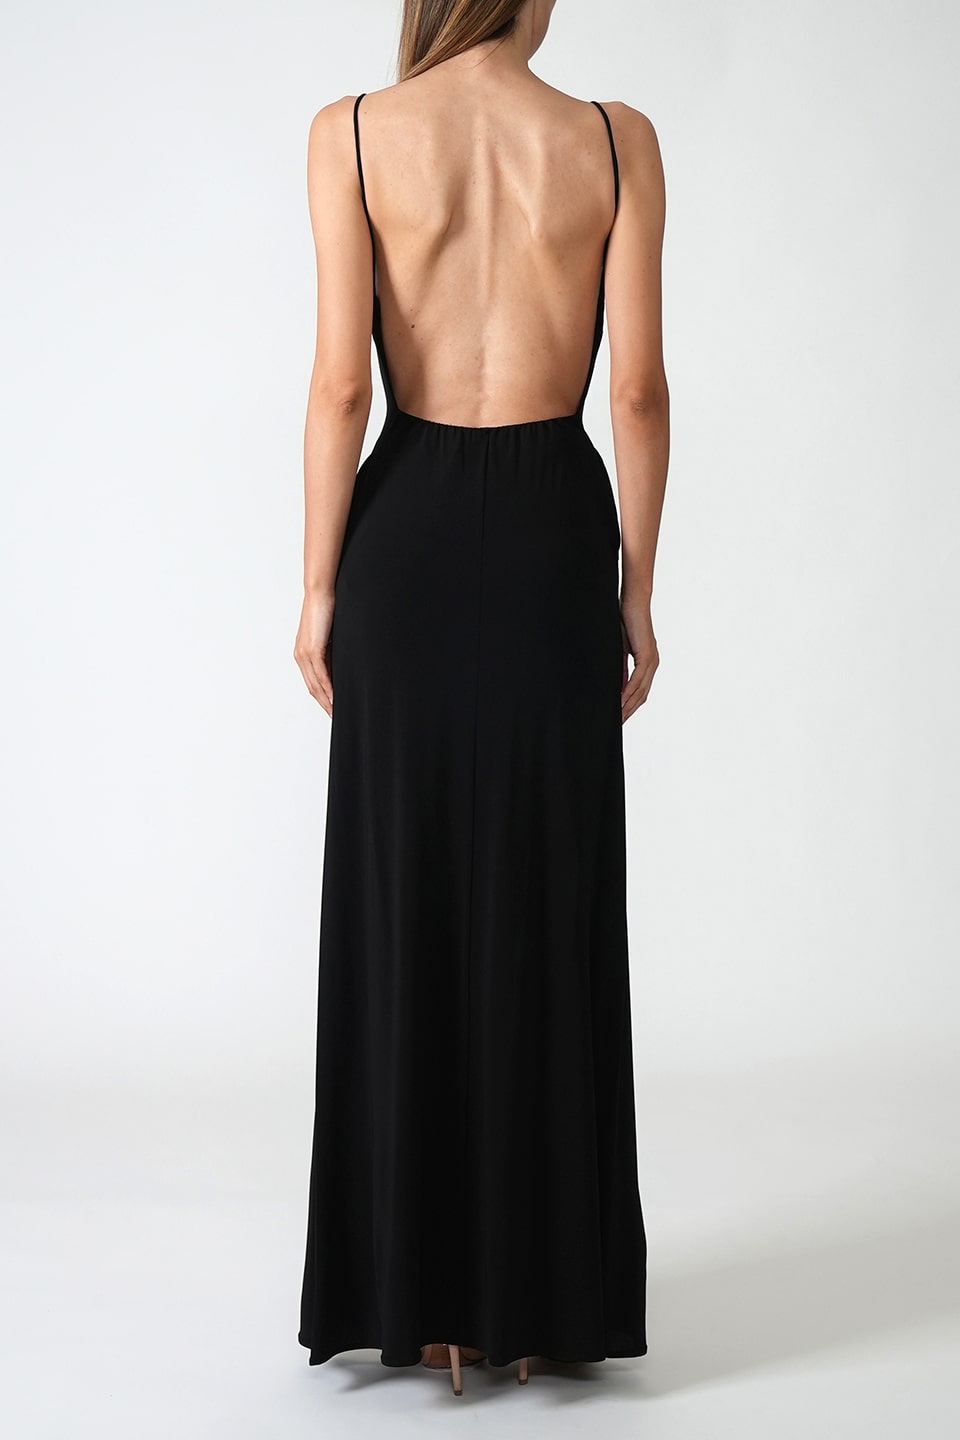 Designer Black Maxi dresses, shop online with free delivery in UAE. Product gallery 5